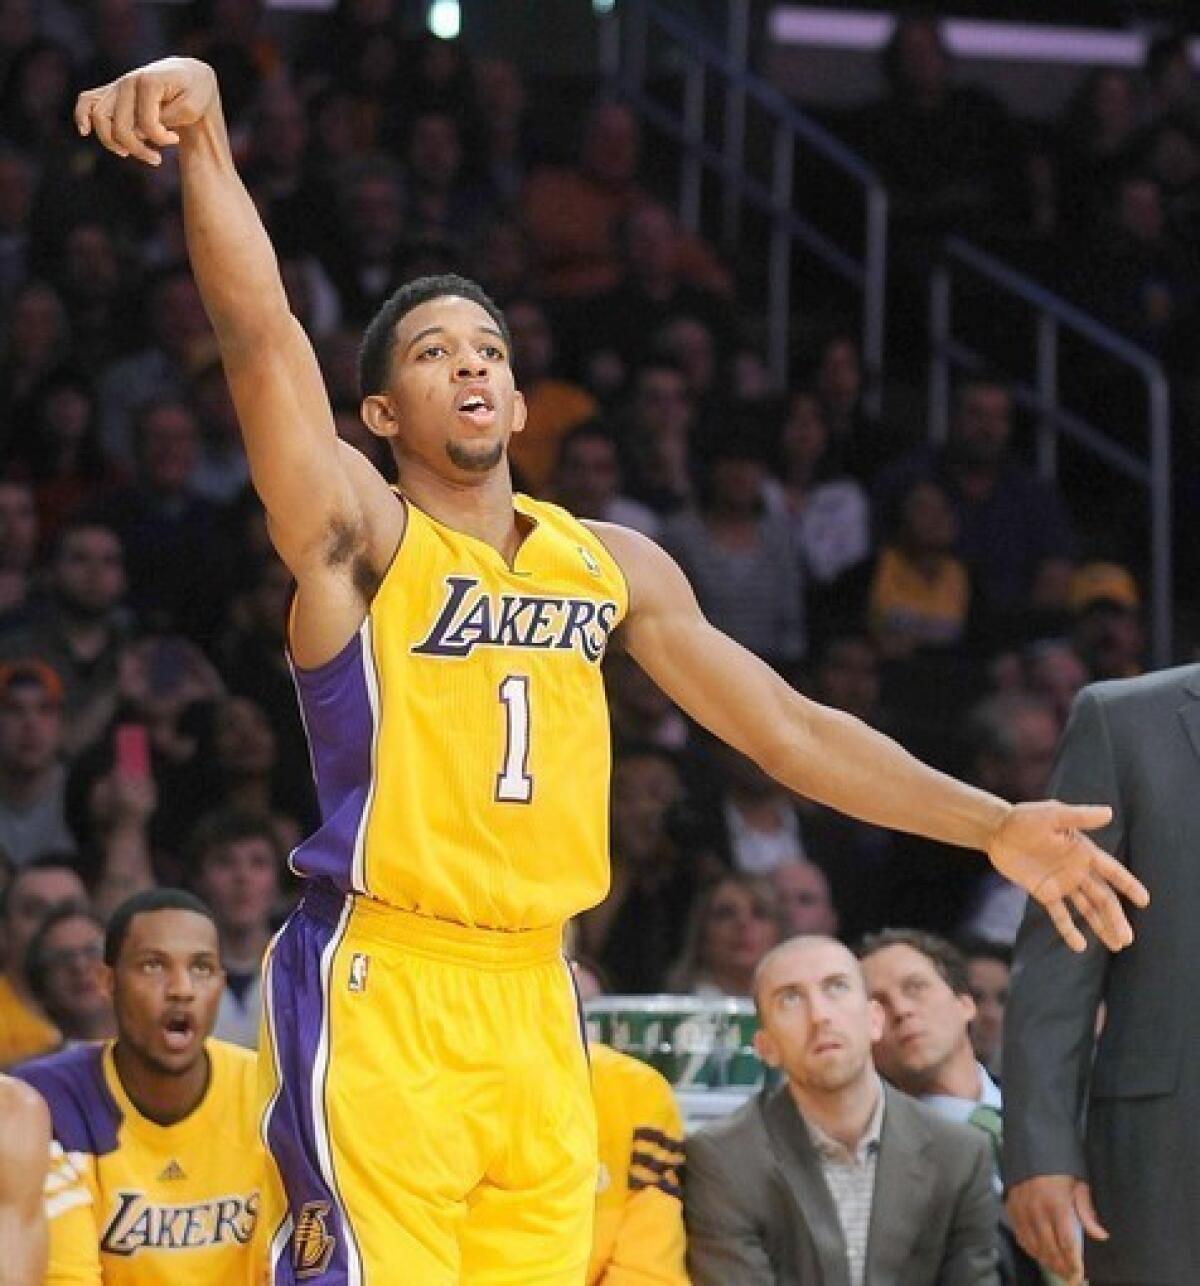 Lakers rookie point guard Darius Morris could compete for more playing time during Steve Blake's injury.